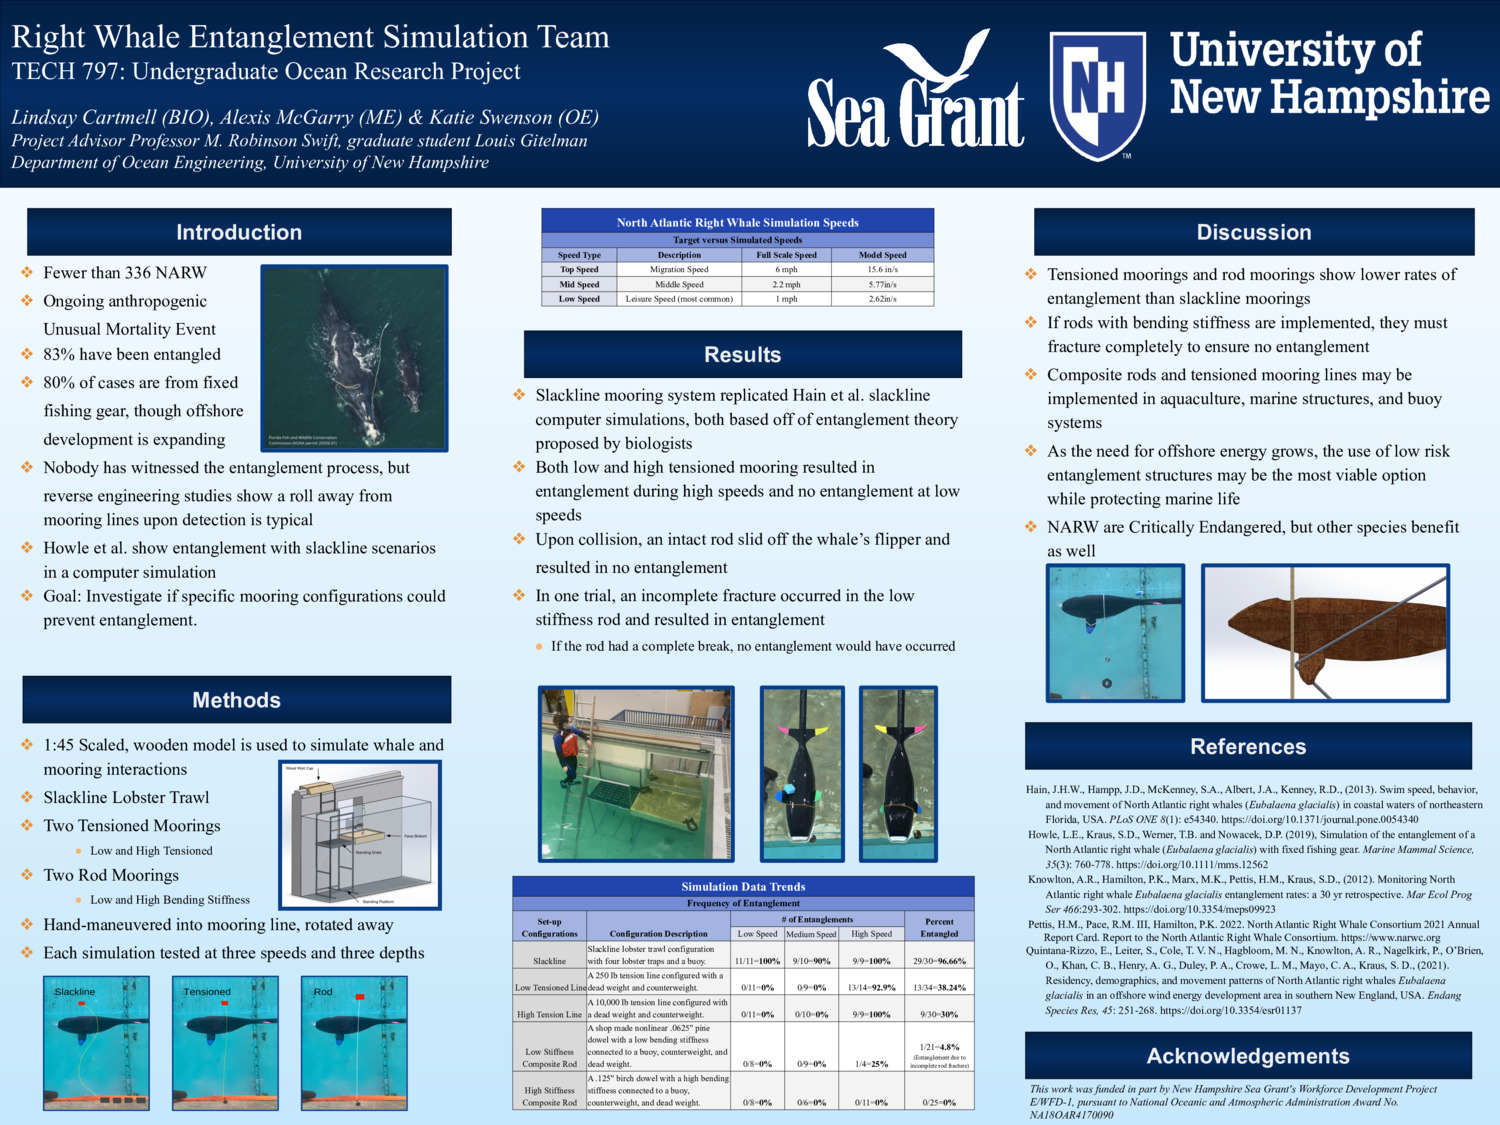 Right Whale Entanglement Simulation Team by lindsaycartmell